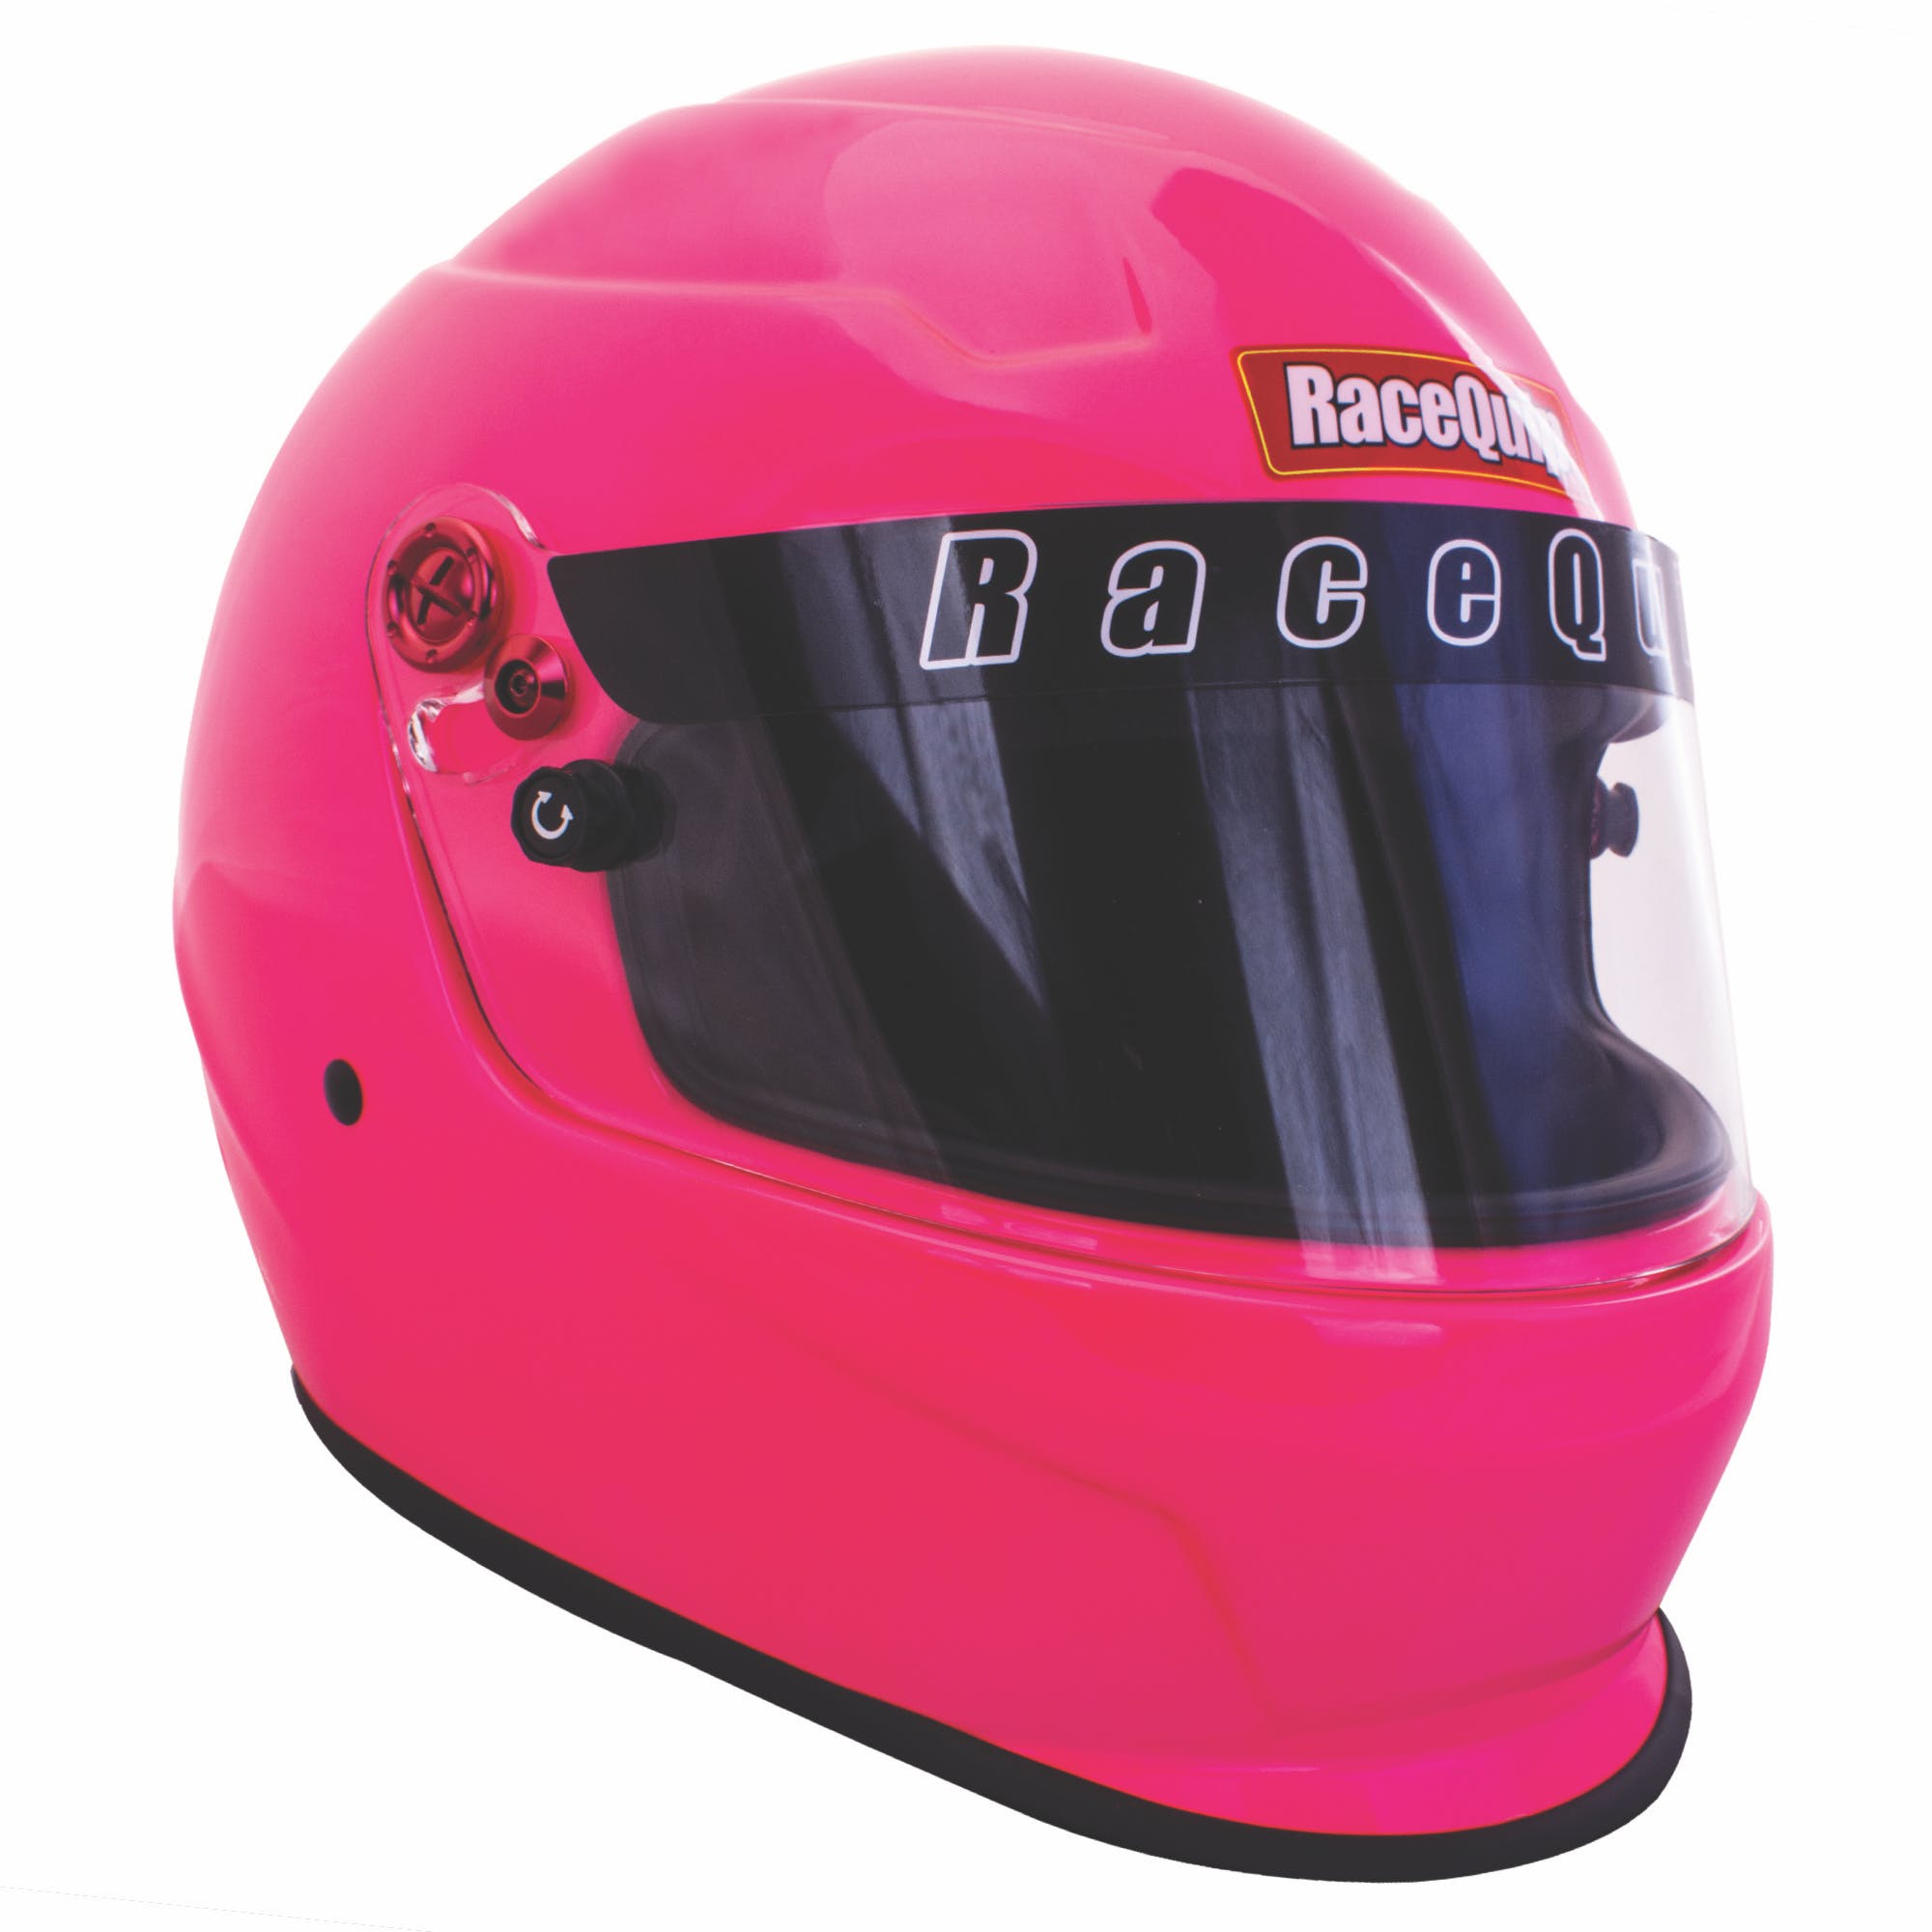 RaceQuip 276882 PRO20 Full Face Helmet Snell SA2020 Rated; Hot Pink Small